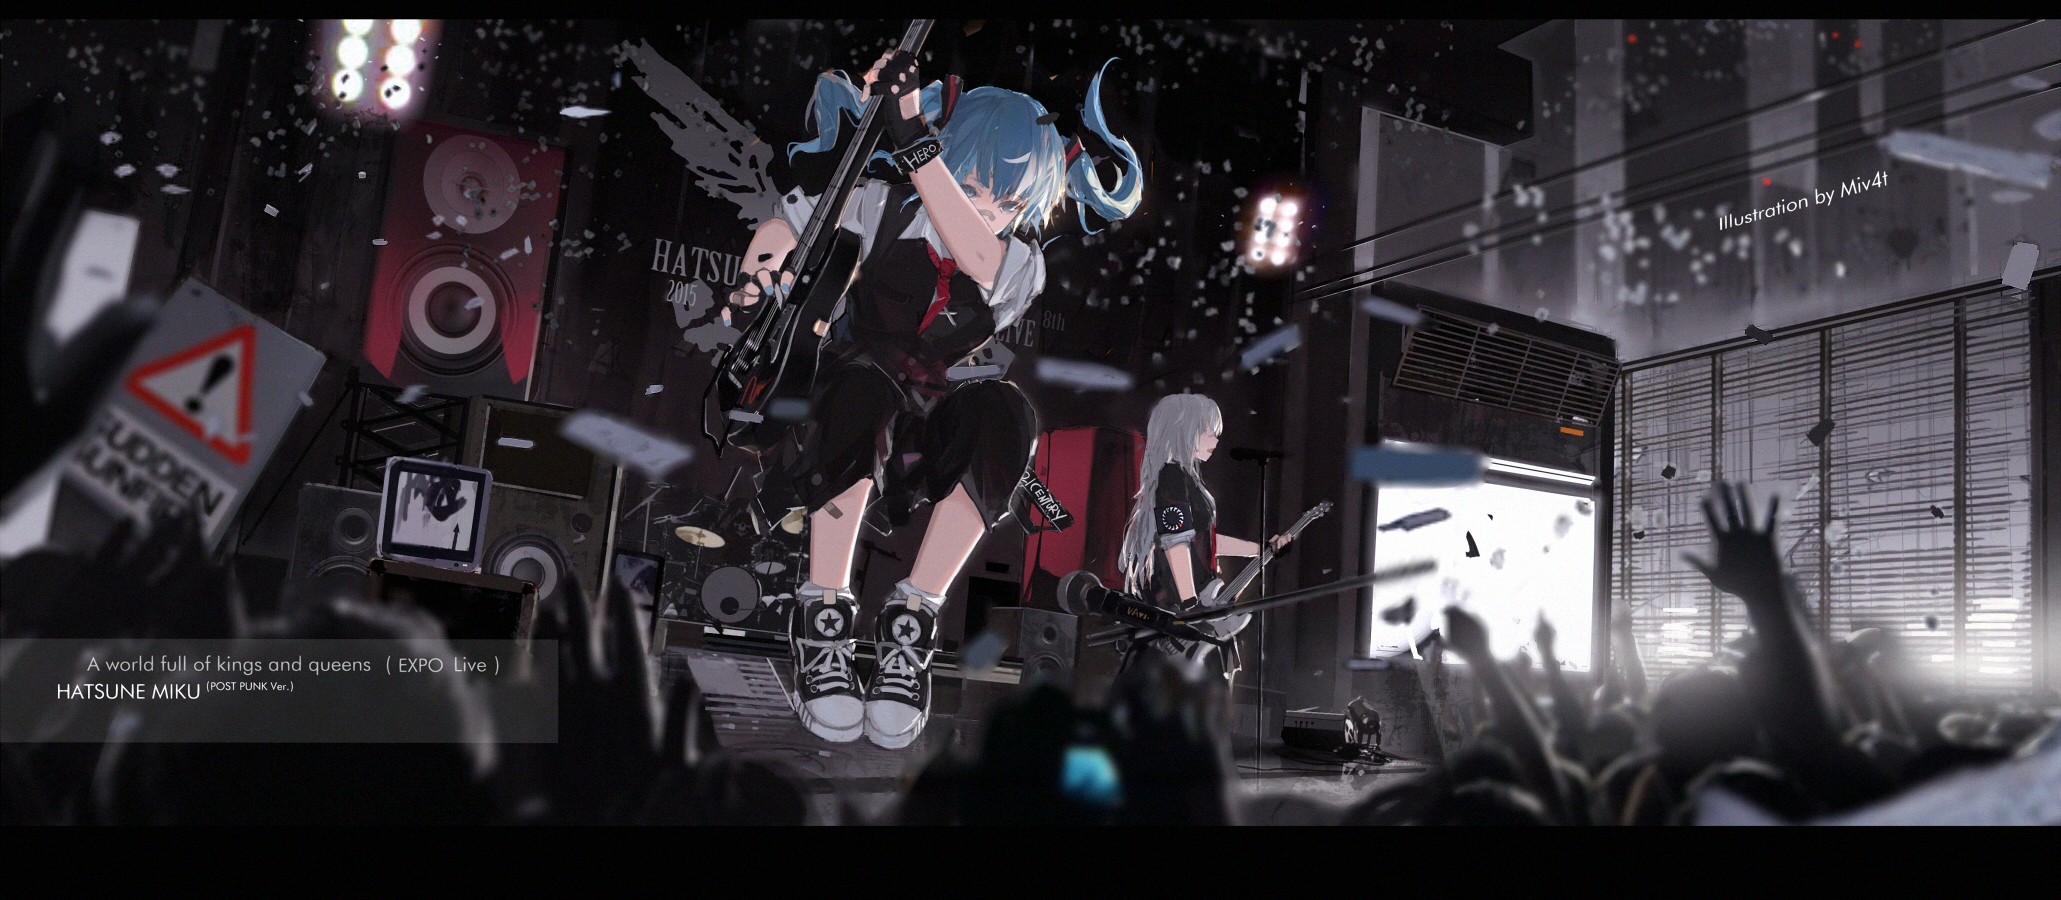 Anime 2061x900 Vocaloid Hatsune Miku long hair twintails jumping concerts drums guitar microphone speakers crowds anime girls anime original characters Miv4t music Pixiv musical instrument